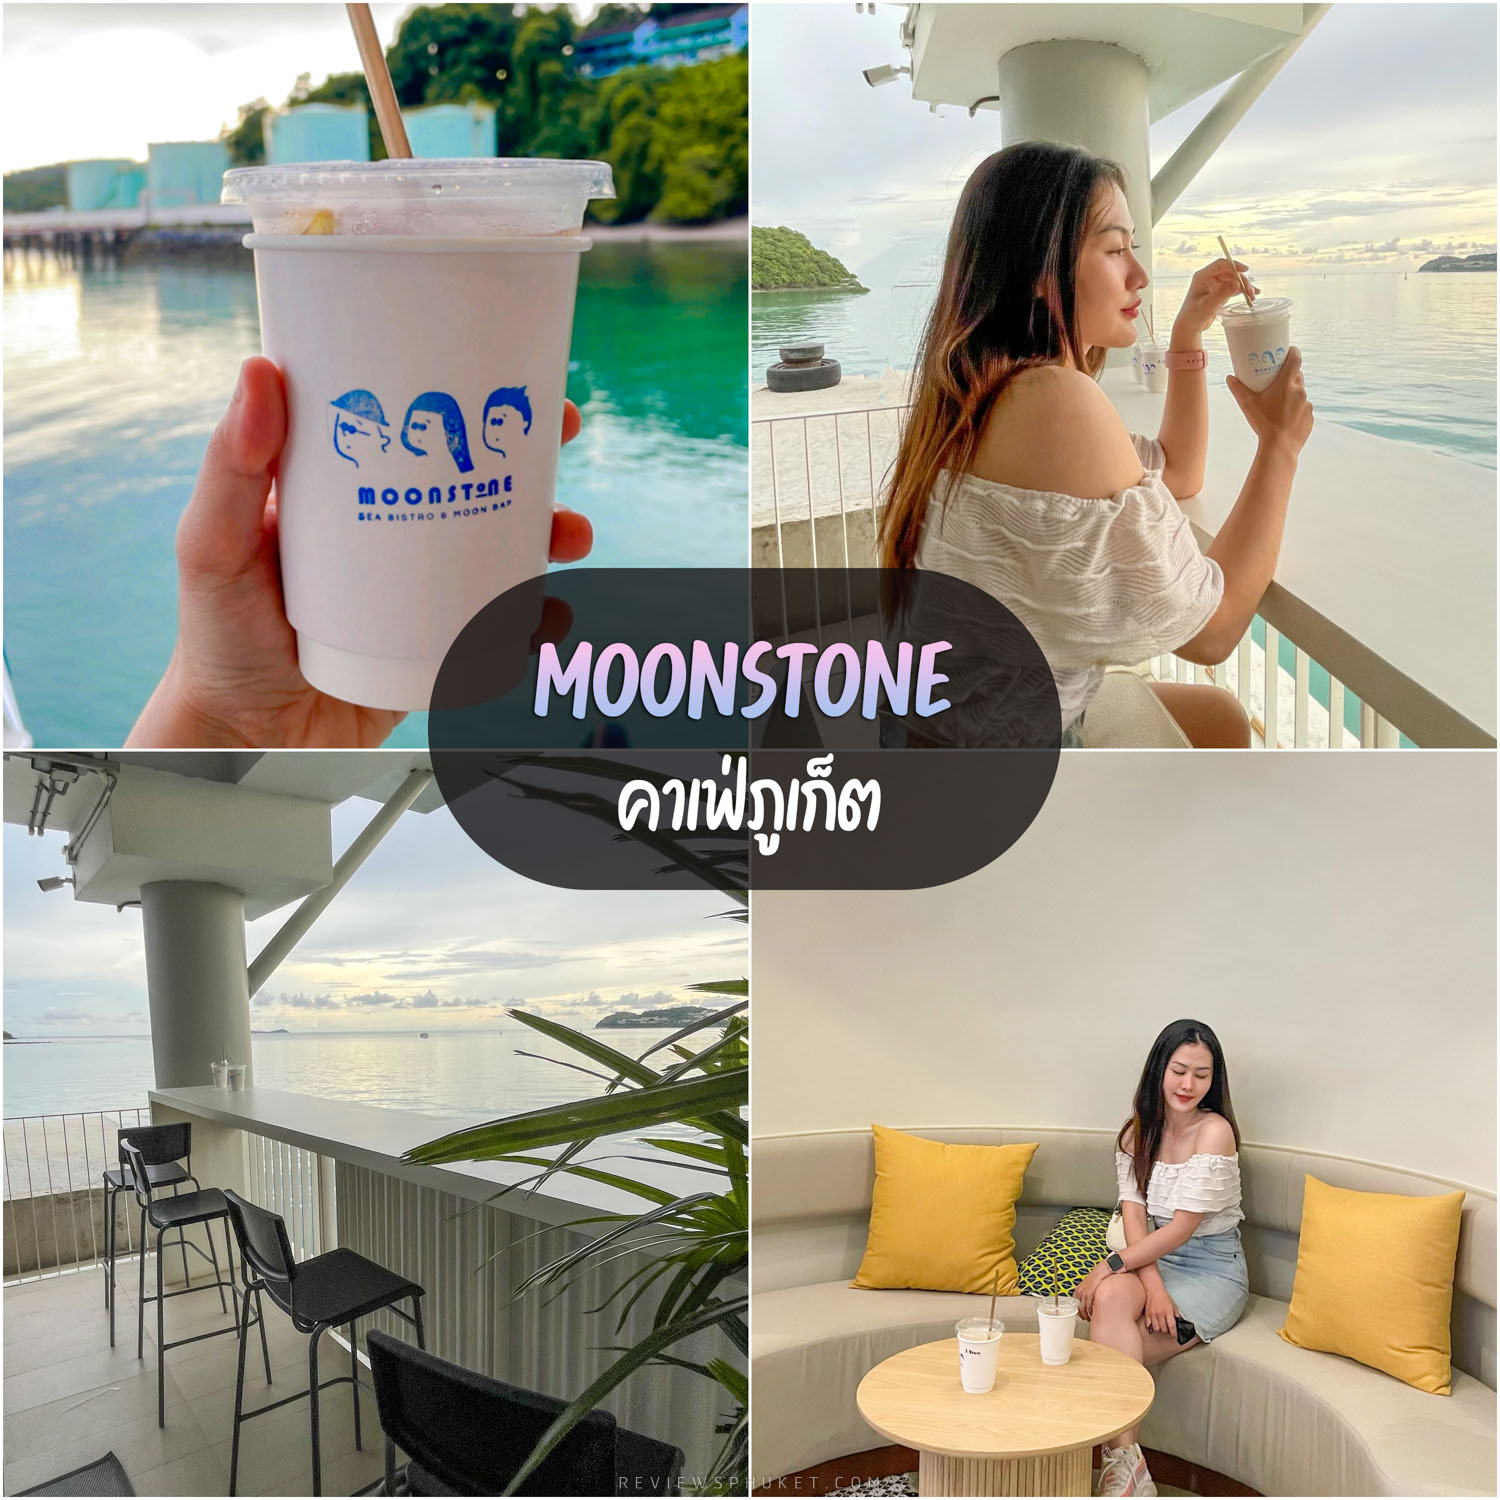 Moonstone Cafe Phuket, a million baht view of the beautiful private sea. Must come and check in.